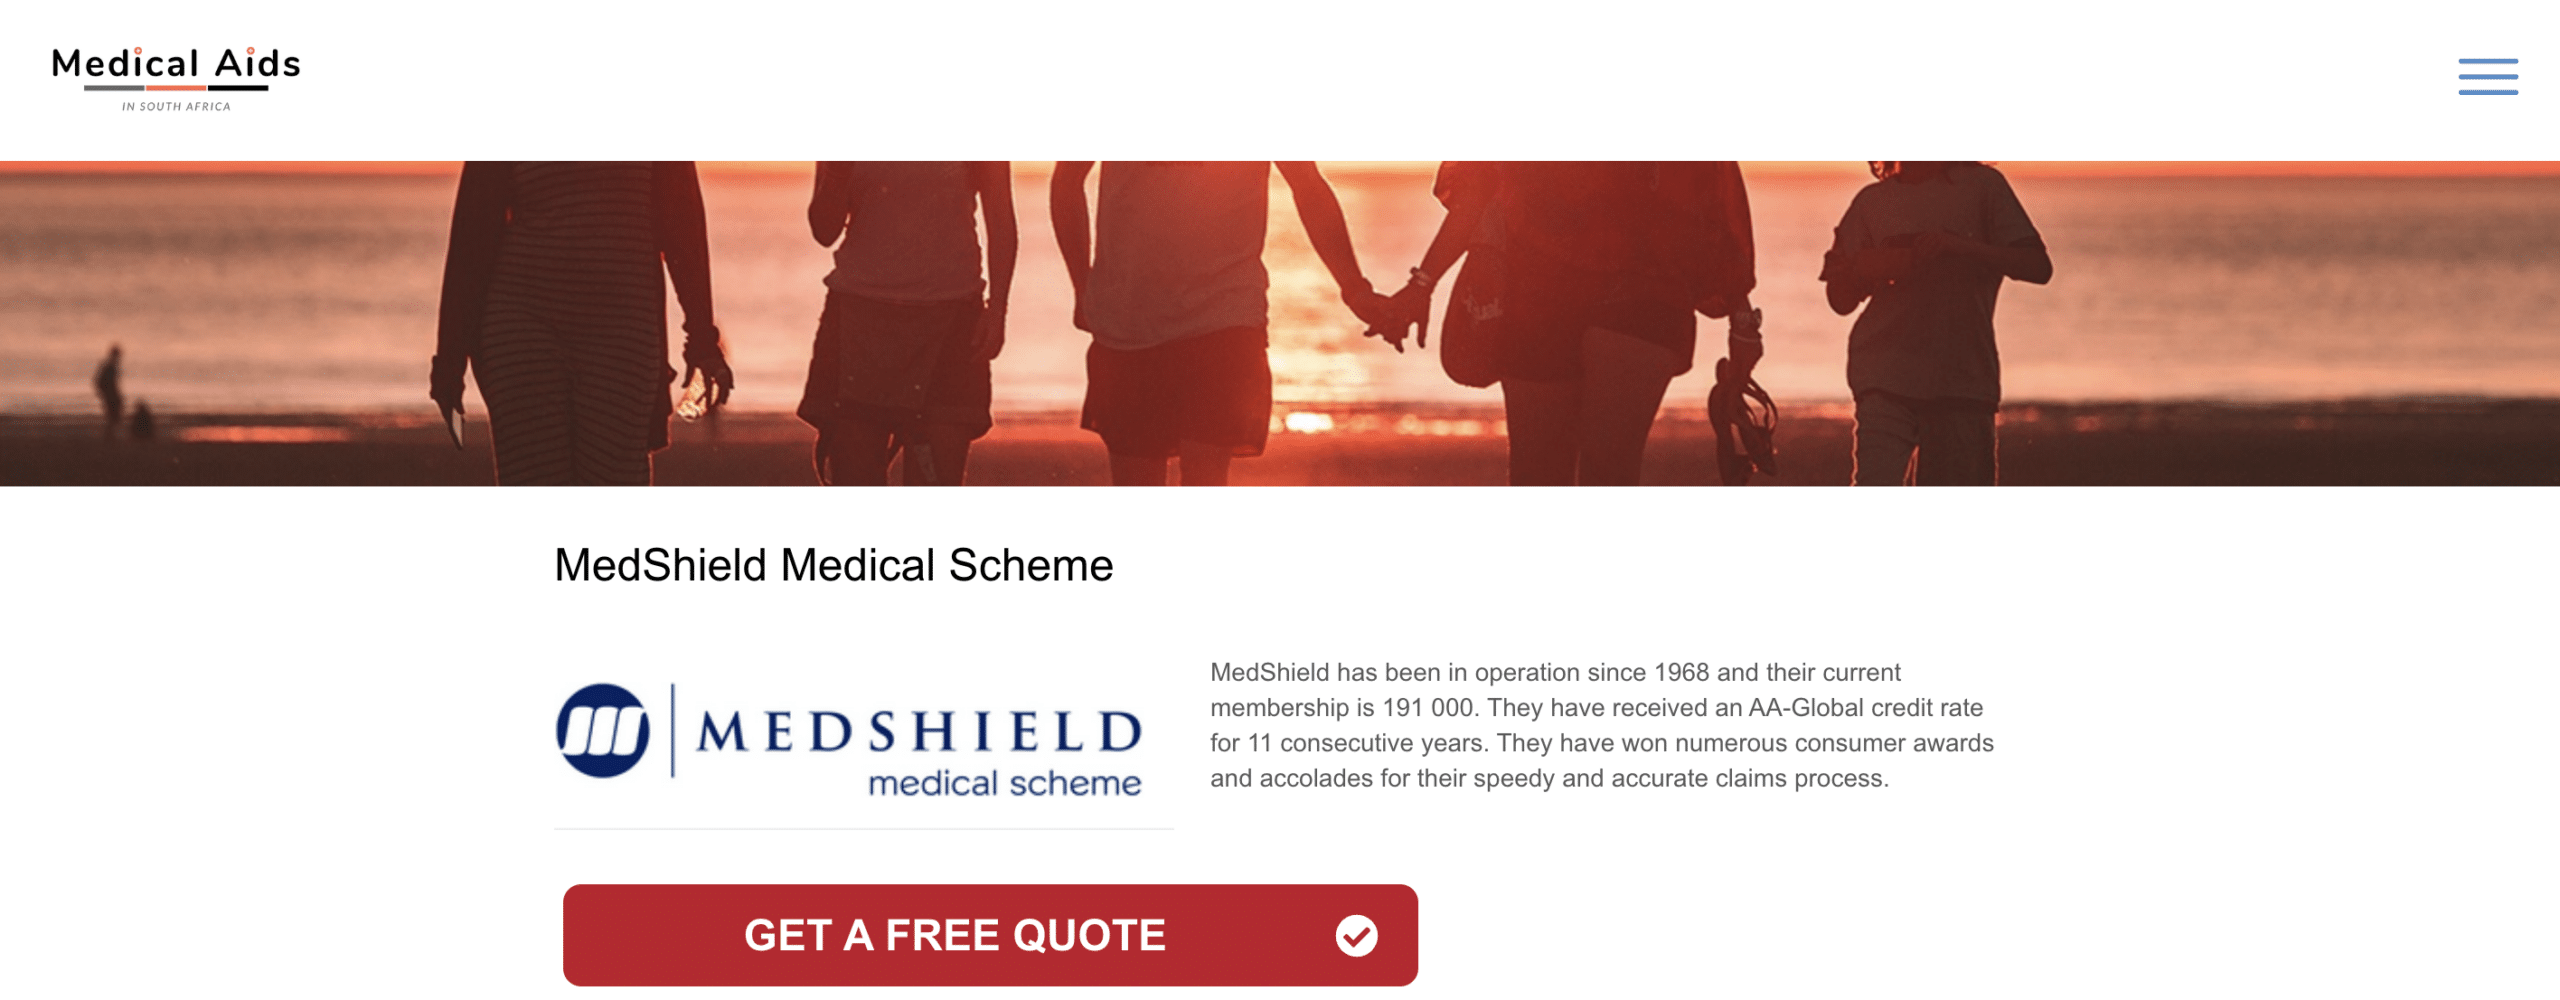 Who is Medshield?